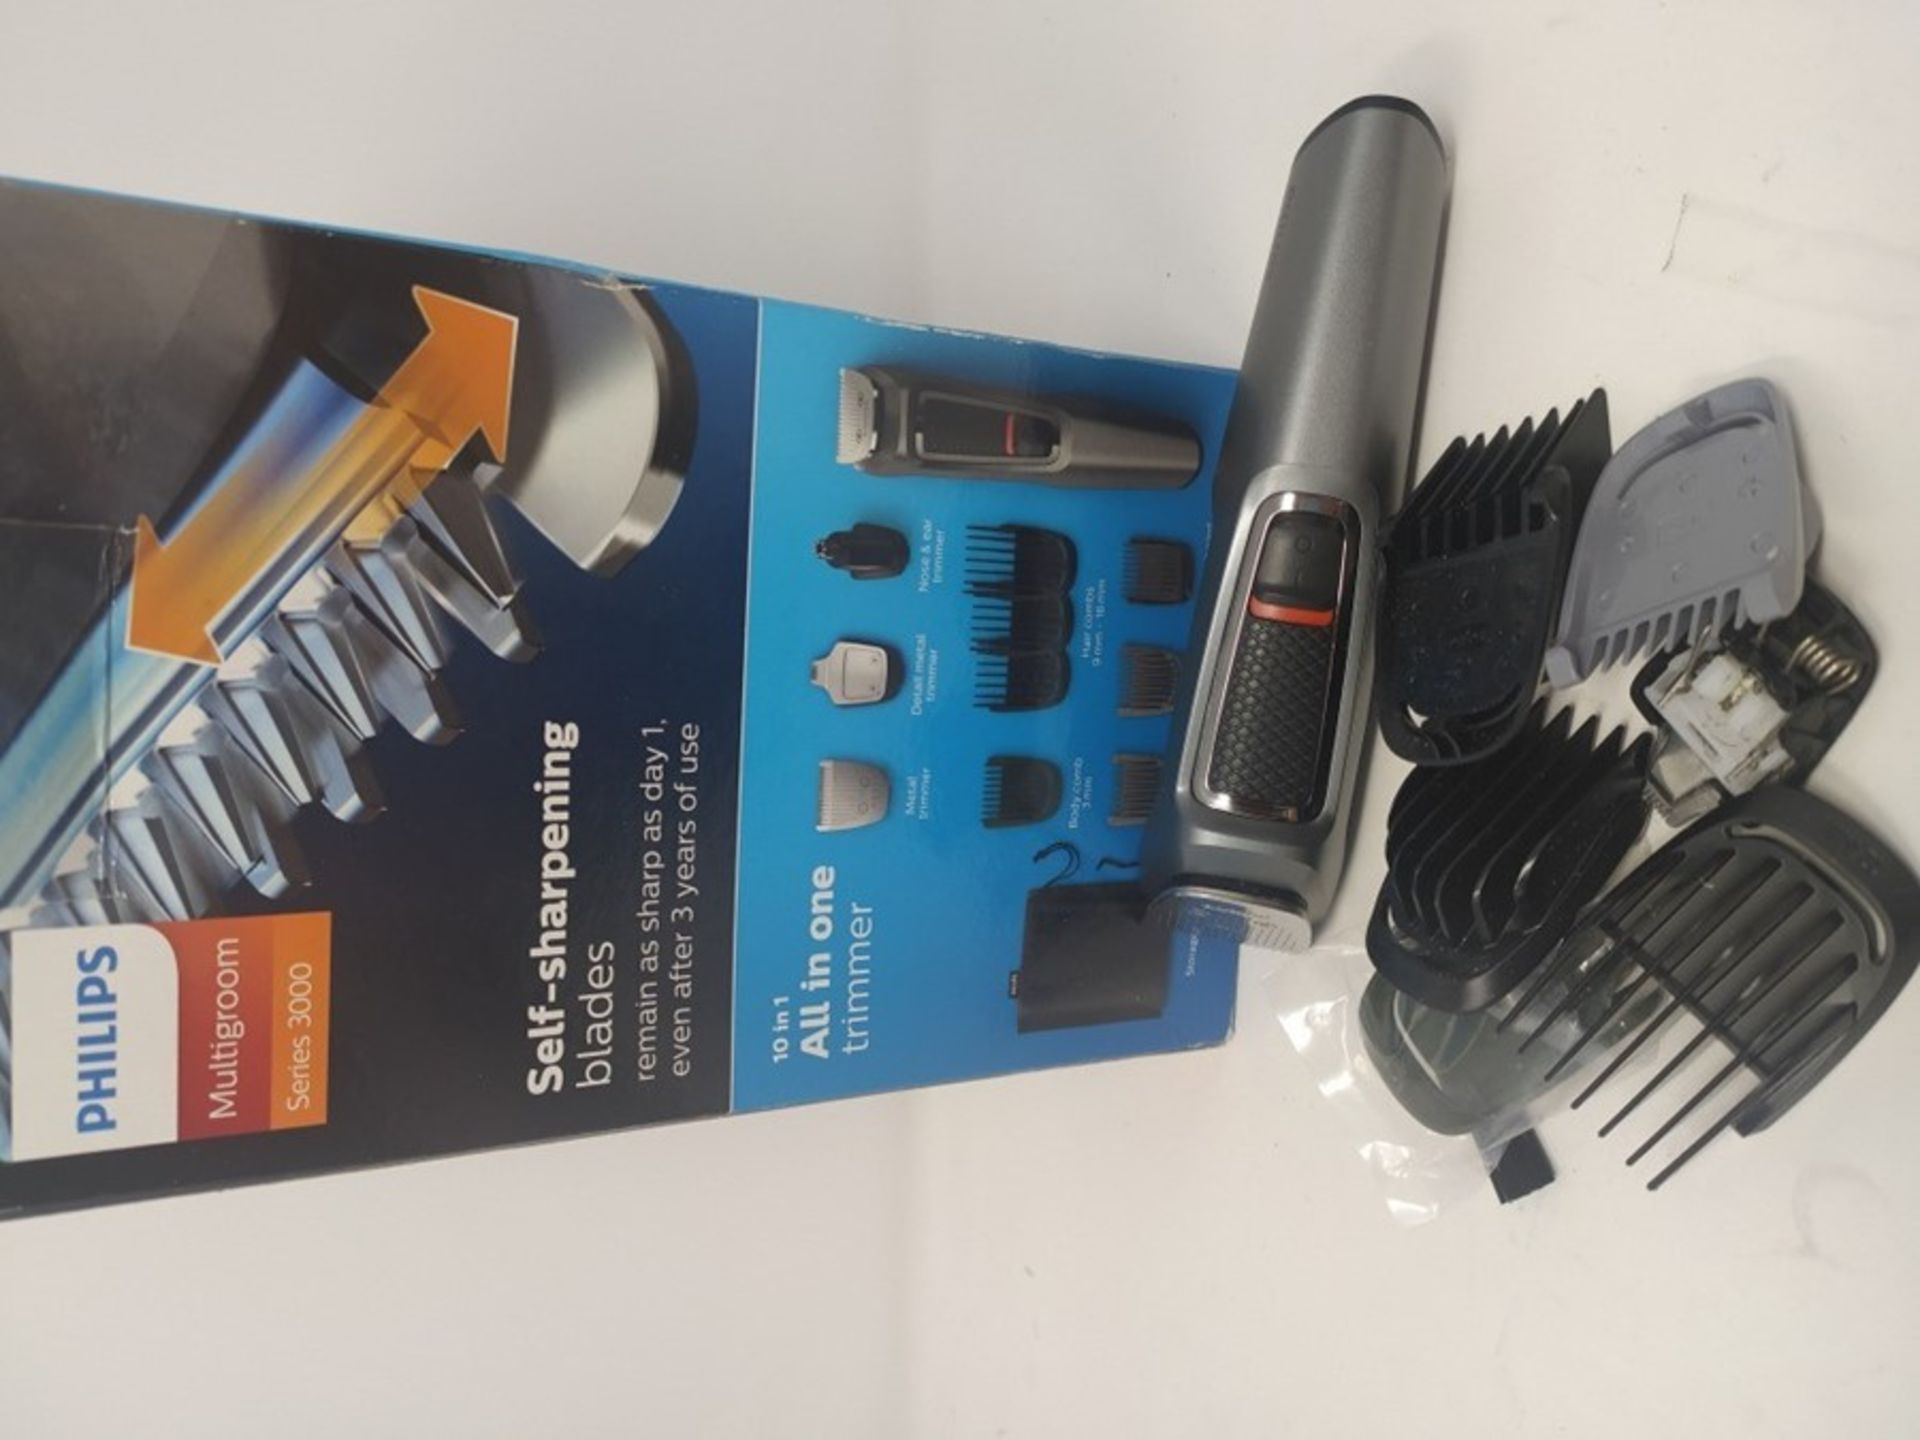 Philips 10-in-1 All-In-One Trimmer, Series 3000 Grooming Kit, Beard Trimmer, Hair Clip - Image 2 of 2